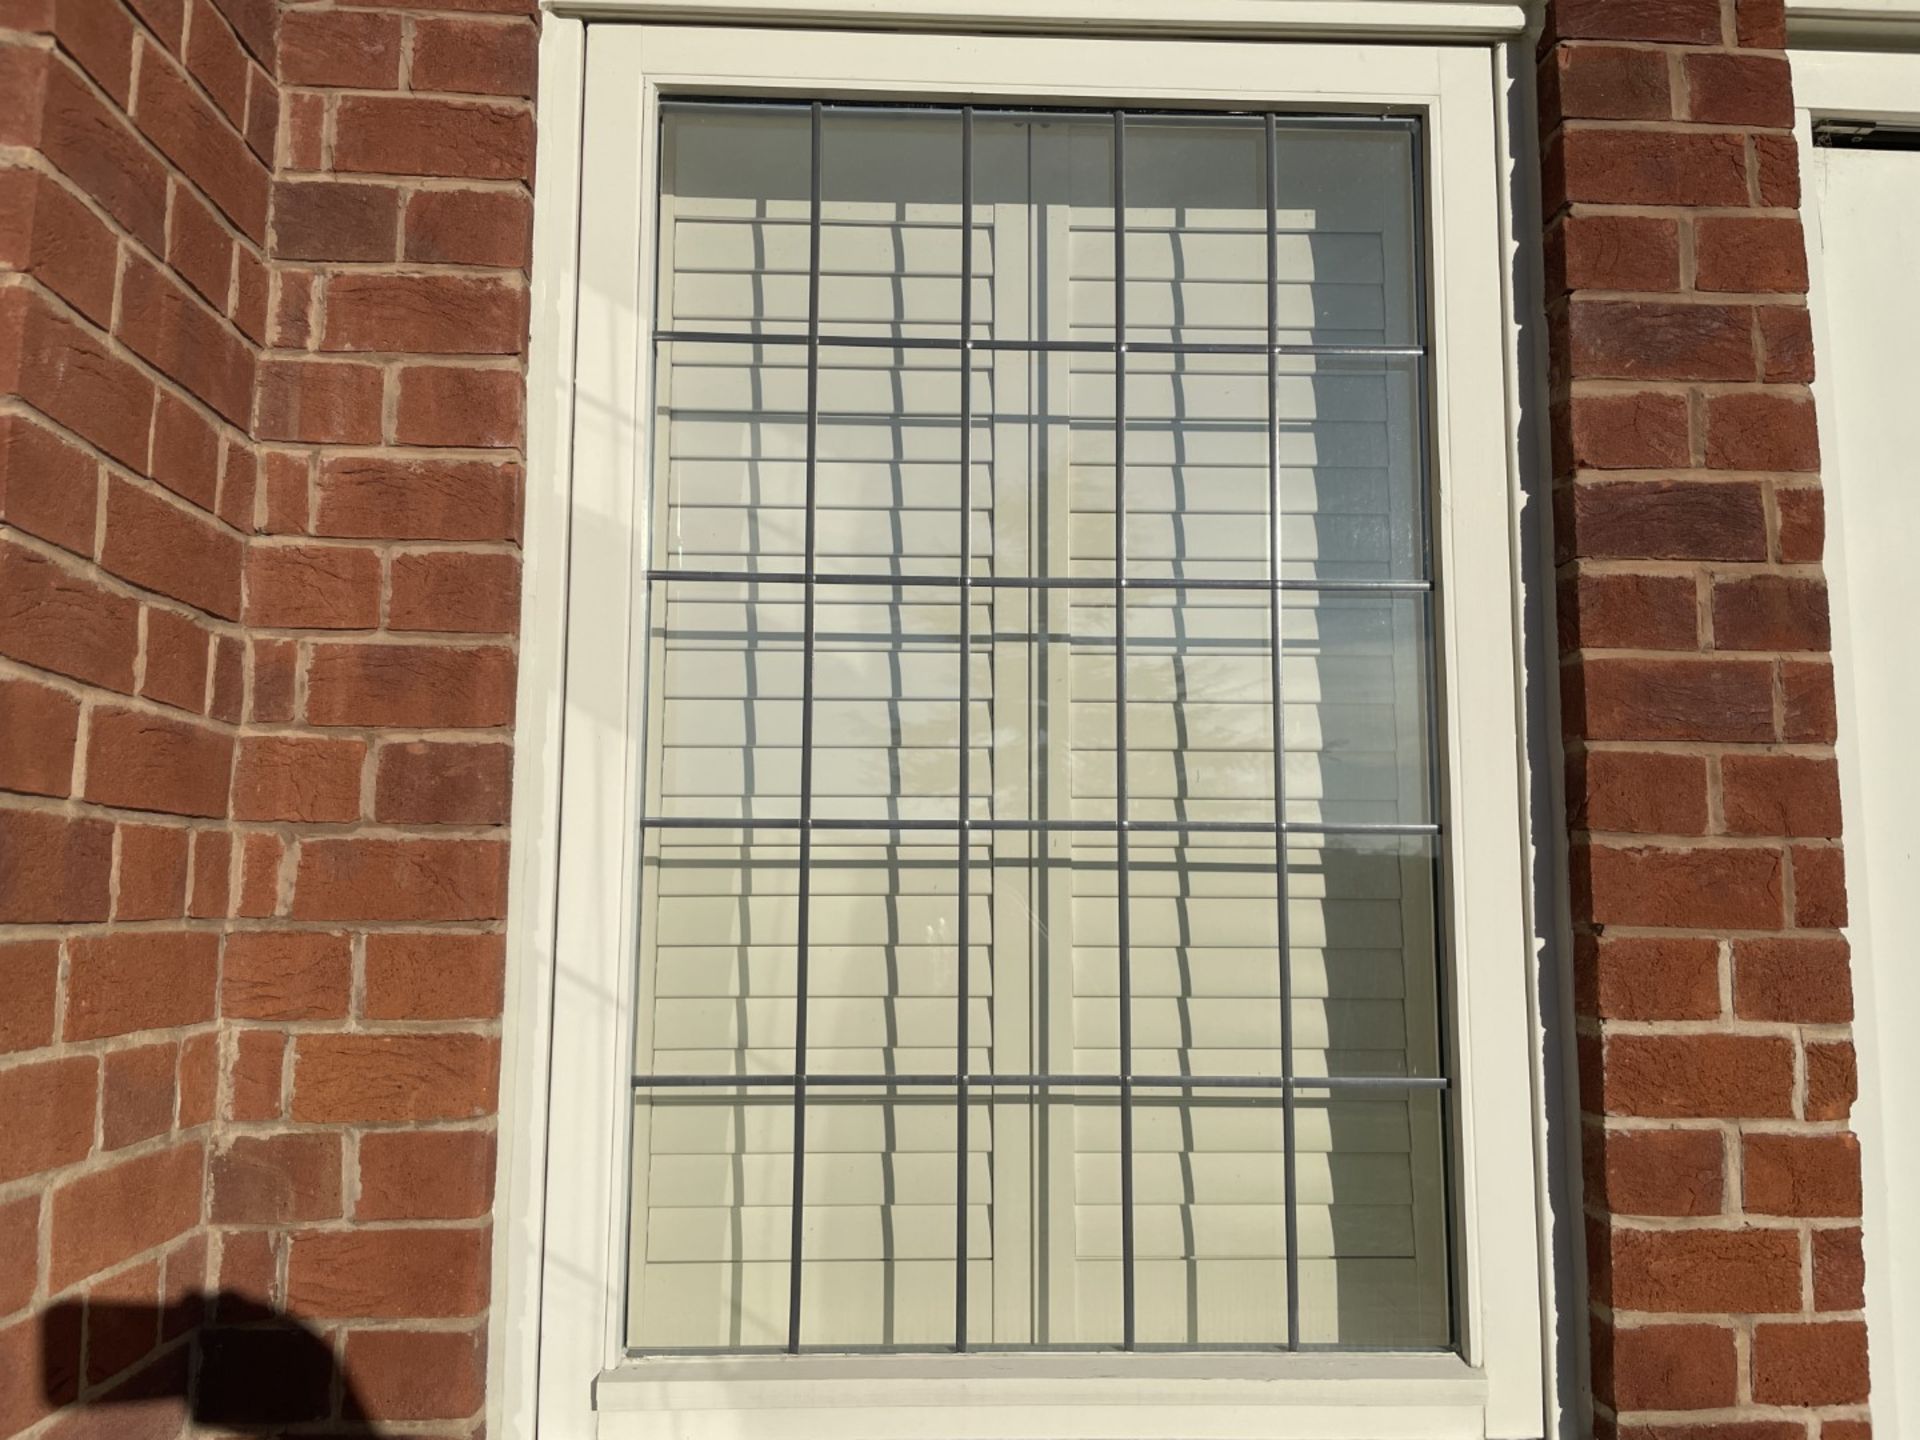 1 x Hardwood Timber Double Glazed Window Frames fitted with Shutter Blinds, In White - Ref: PAN108 - Image 3 of 19